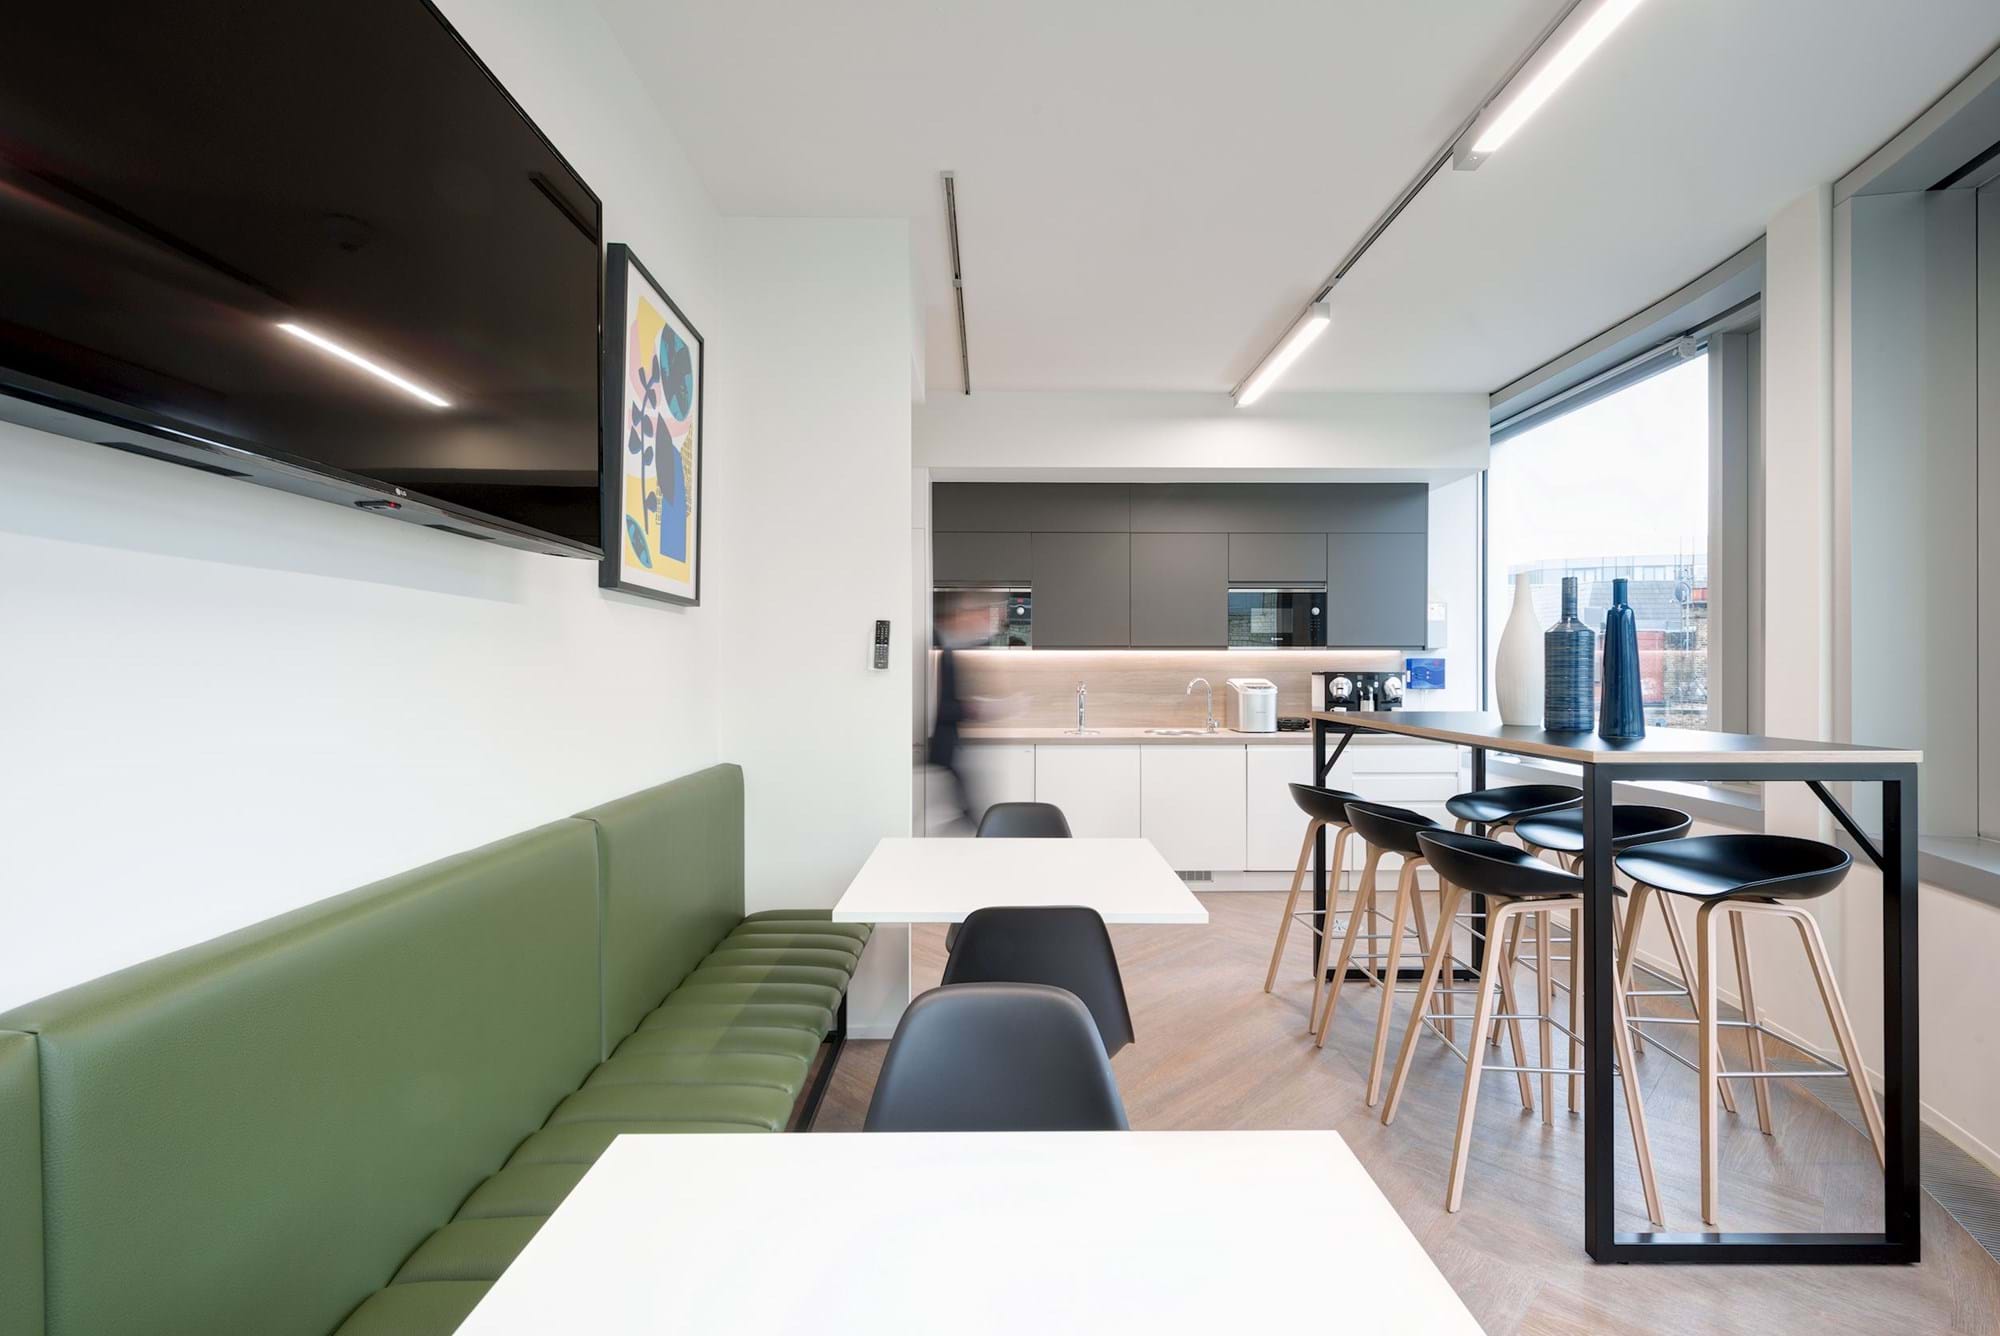 Modus Workspace office design, fit out and refurbishment - First Quantum Minerals - FQM 09 highres sRGB.jpg